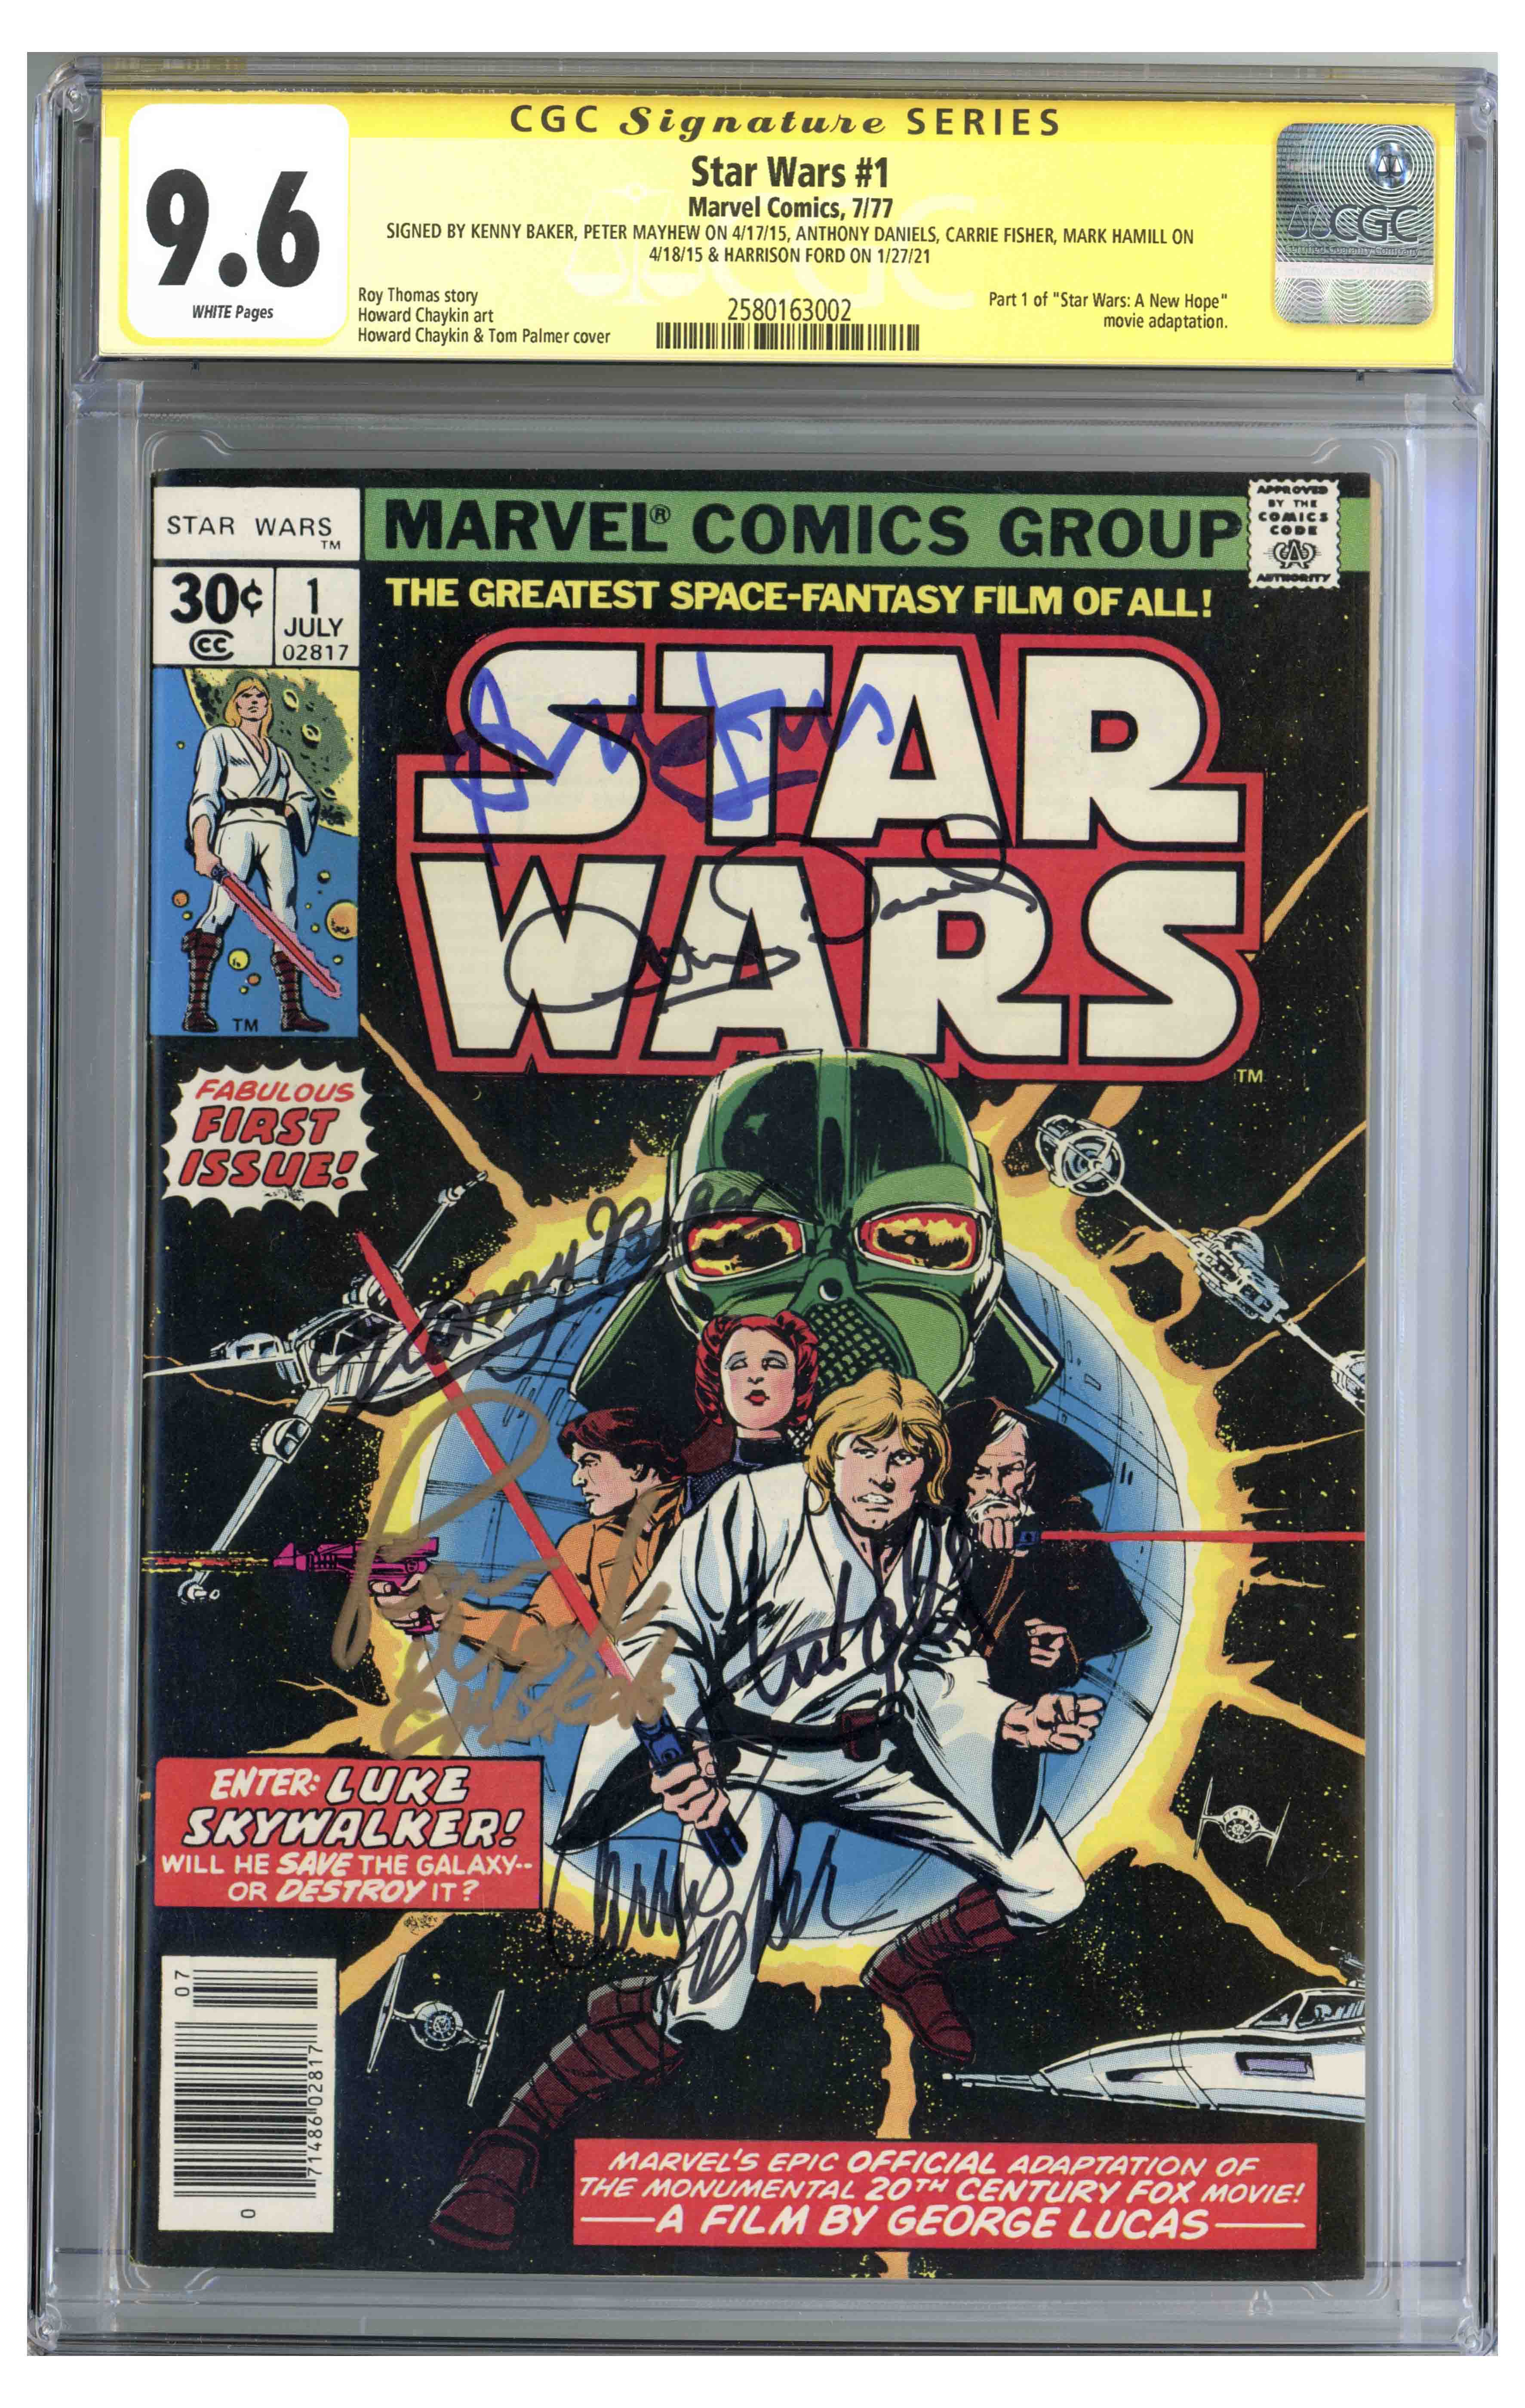 Geek insider, geekinsider, geekinsider. Com,, ''star wars #1'' comic book signed by mark hamill, carrie fisher, harrison ford to be auctioned, comics